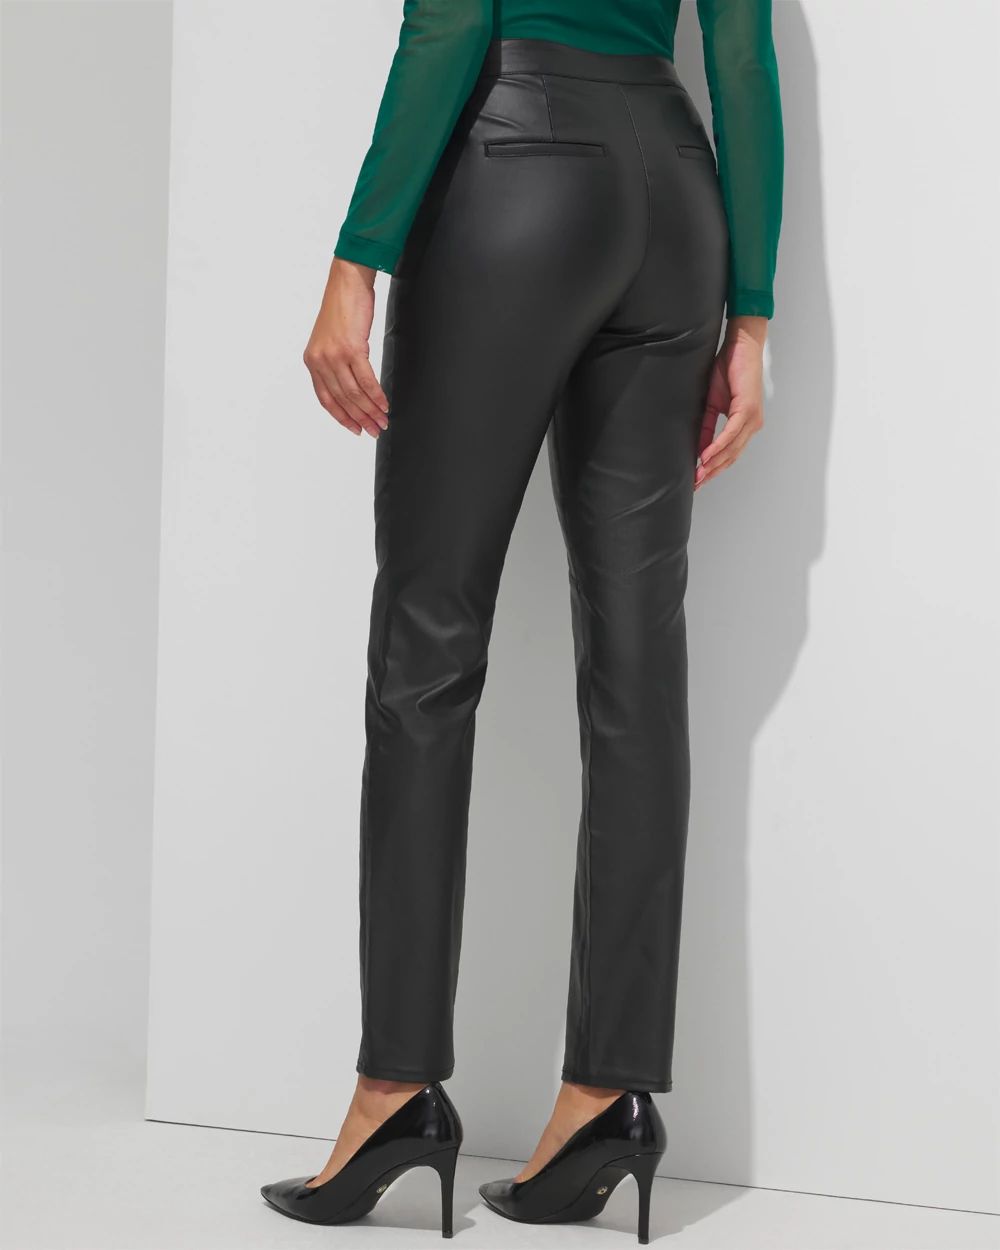 Outlet WHBM High Rise Pull-On Coated Slim Jeans click to view larger image.